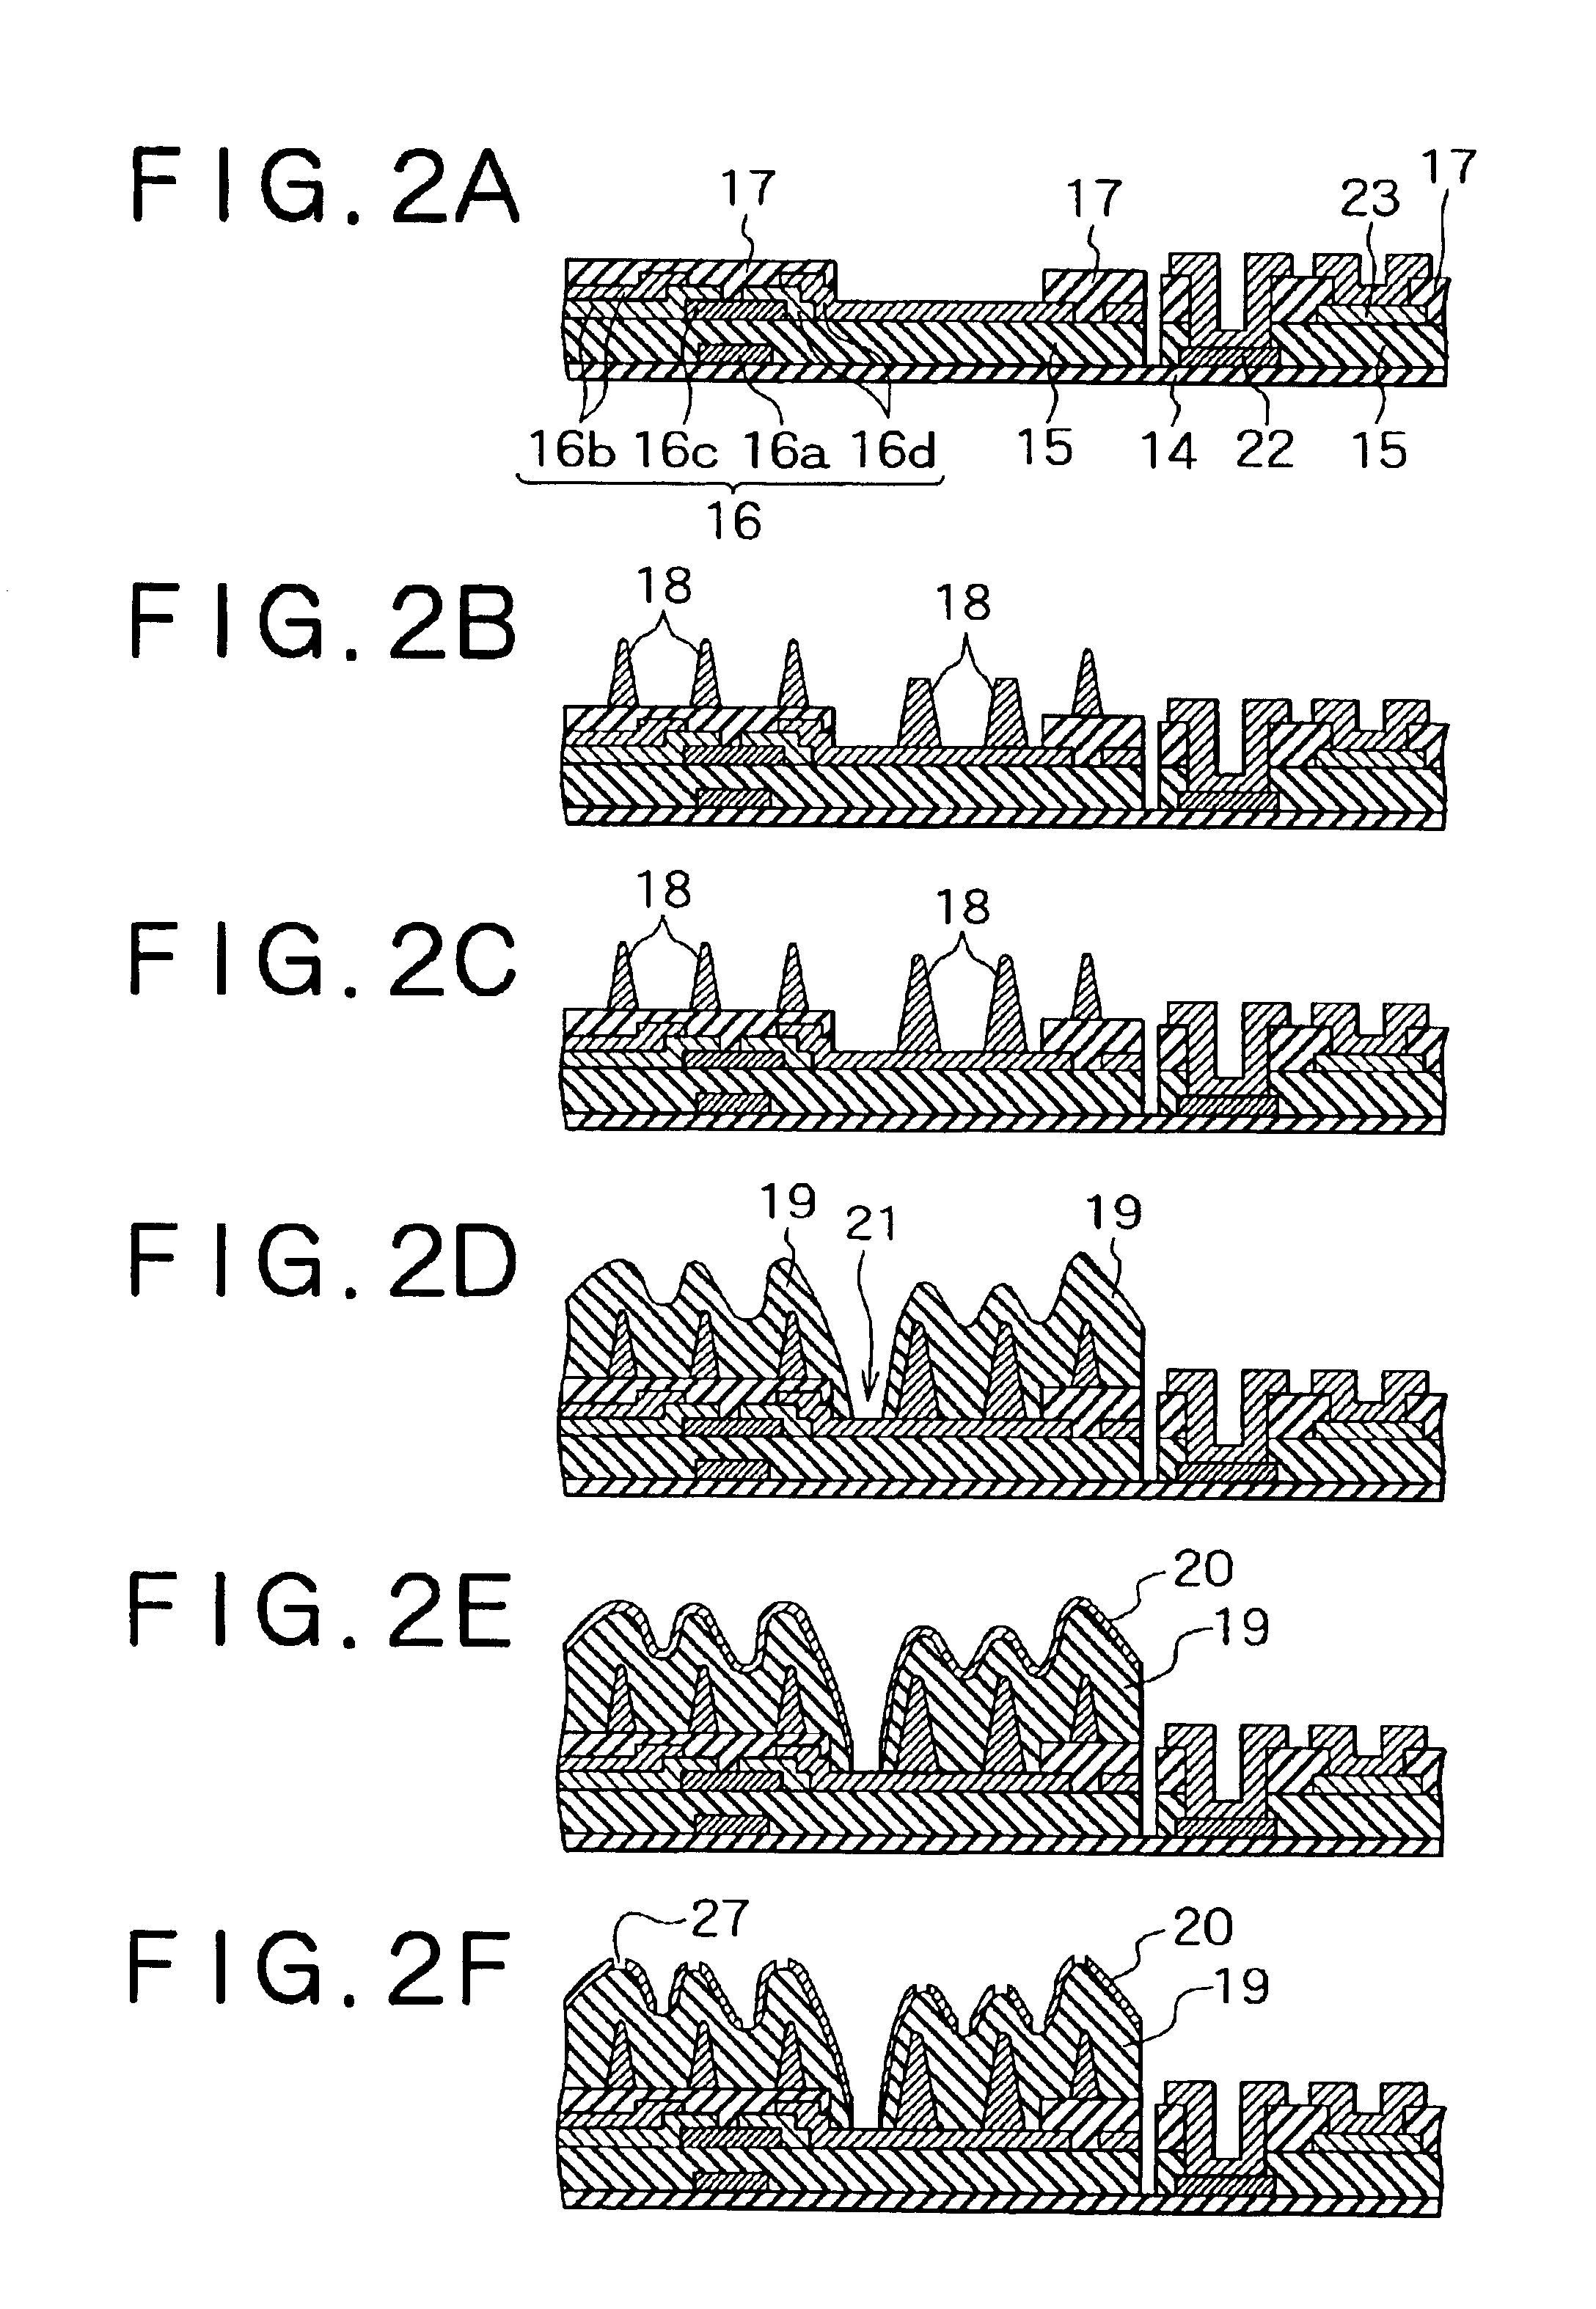 Liquid crystal display having undulated anisotropic reflection electrodes and openings therein